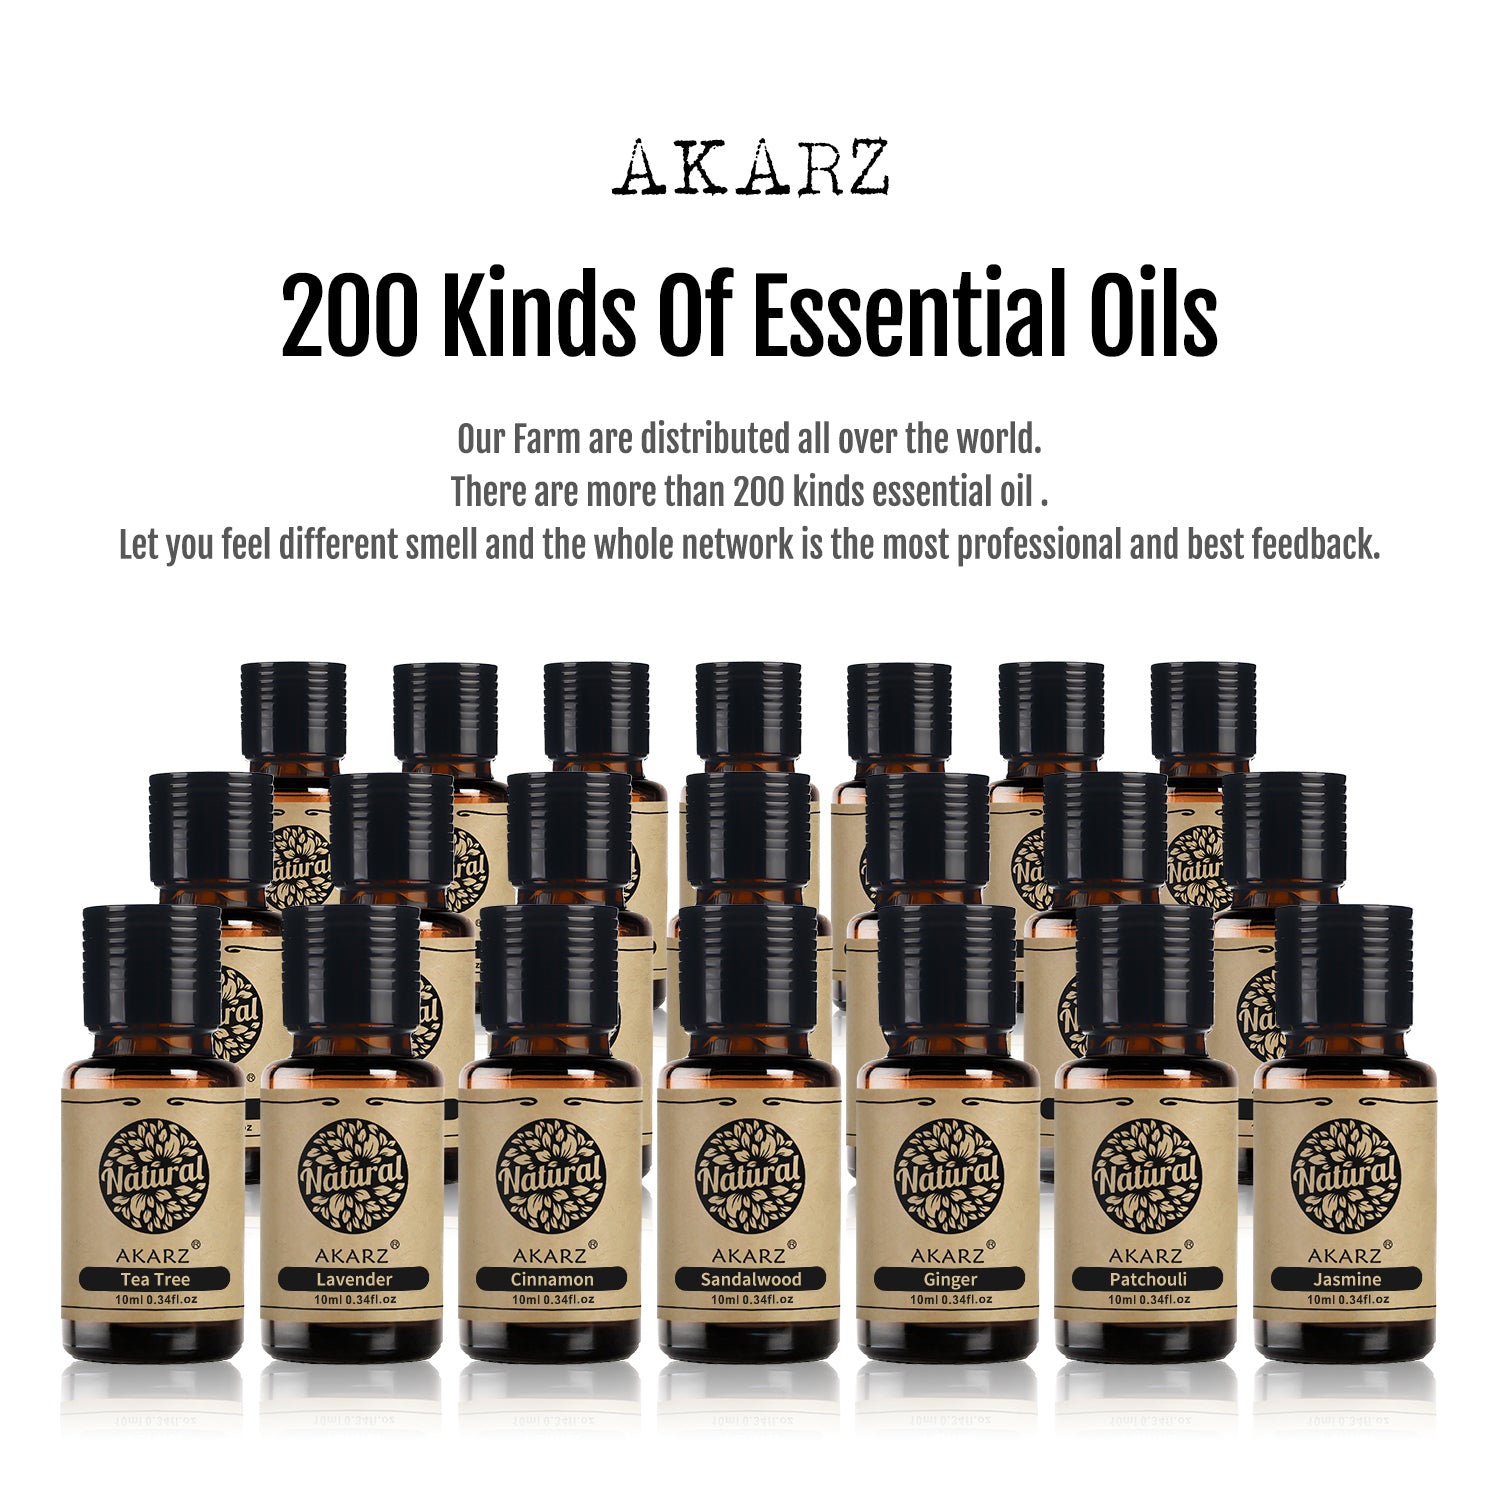 AKARZ Hots 24 Sets Essential Oils Elegant Packaging For Perfect Gift Aromatherapy Oil for Humidifier, Diffuser, Bath, Spa, Massage, Perfume, Home Cleaning and More